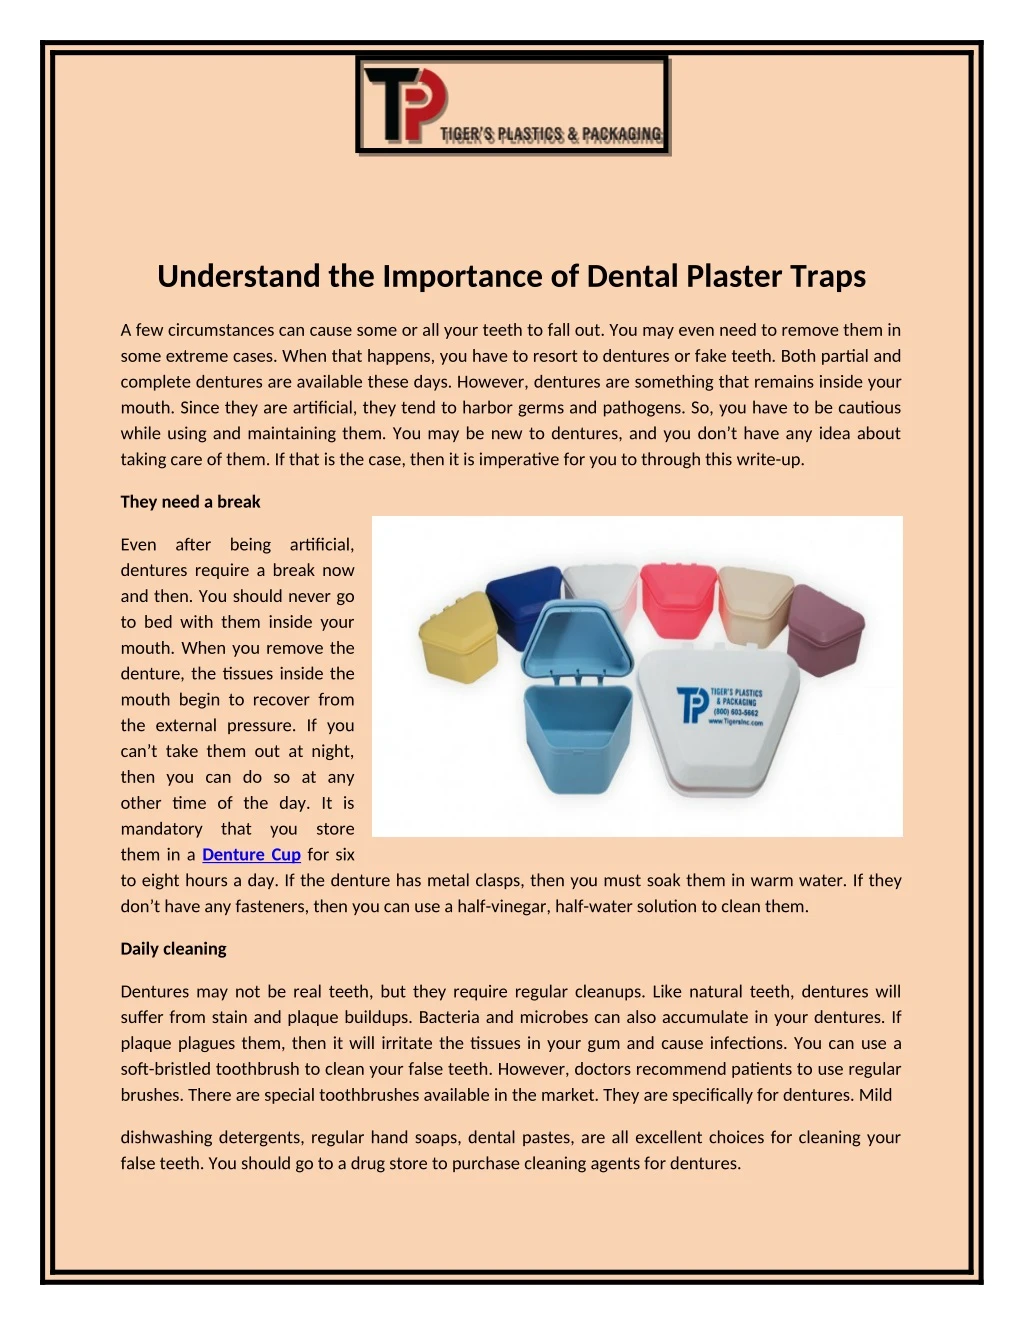 understand the importance of dental plaster traps